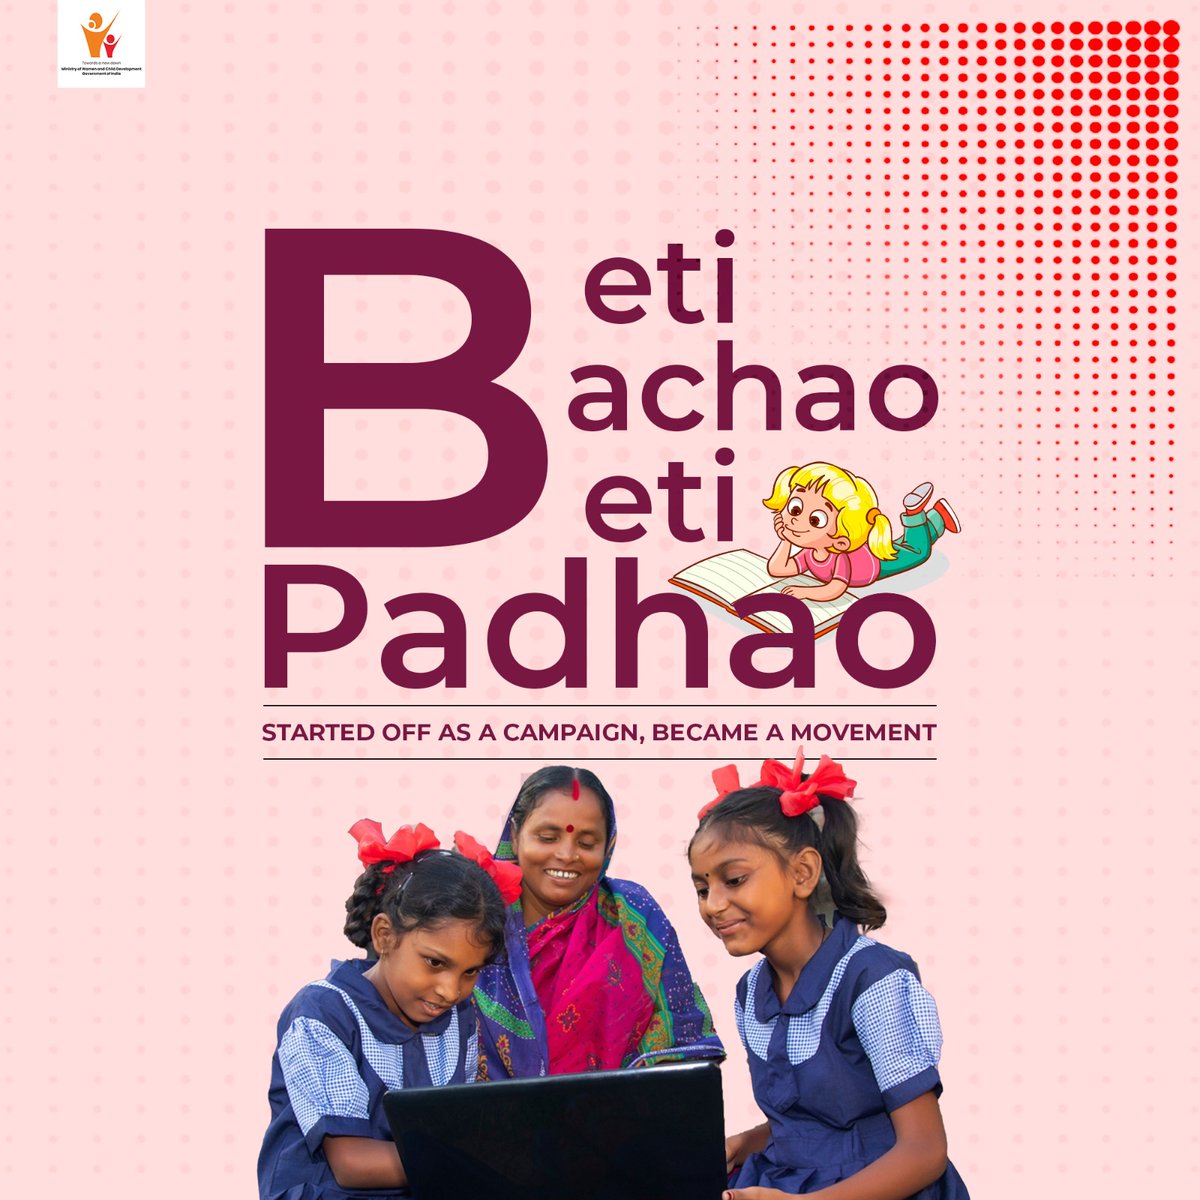 By harnessing the synergies & focusing on convergence, #BetiBachaoBetiPadhao has acted as a force multiplier. Today, #BBBP has become not only a clarion call to society at large for valuing the girl child but also a confidence booster for the girl children themselves @PIBWCD